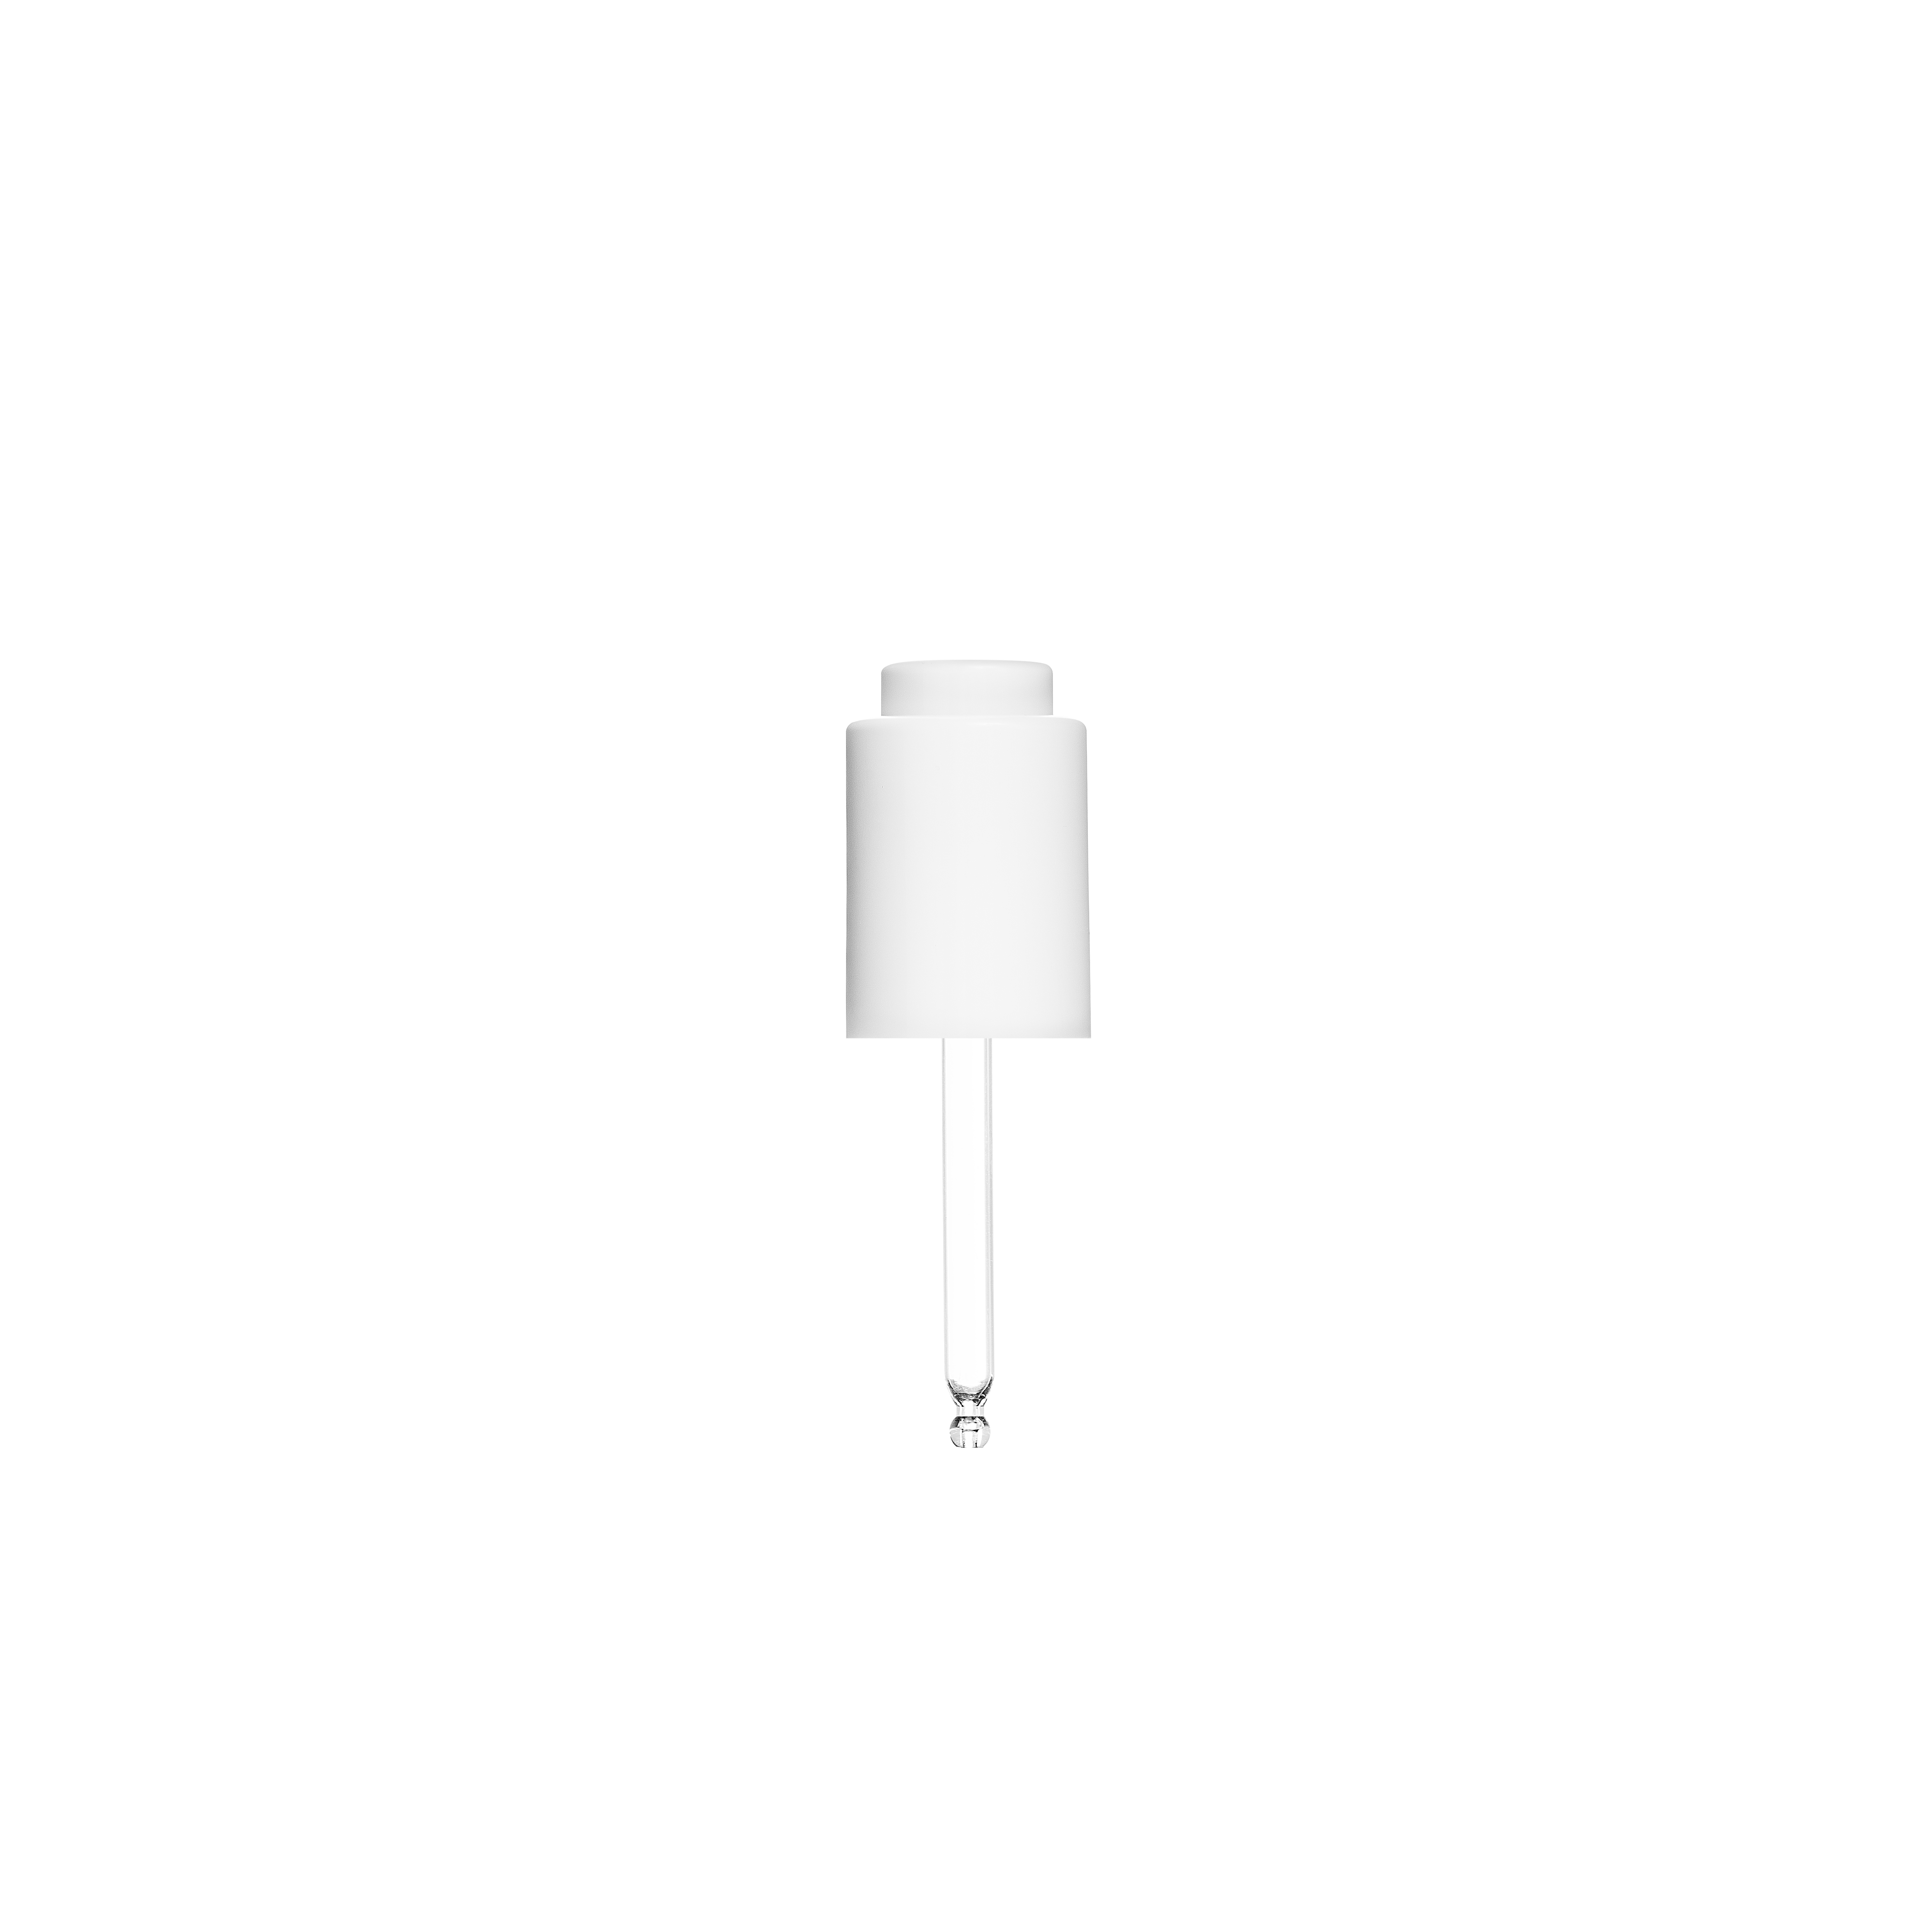 Push-button pipette 18/415 thread, PP/ABS, white glossy finish, white button bulb Nitrile 0.4 ml, ball tip, straight for Laurel 30 ml